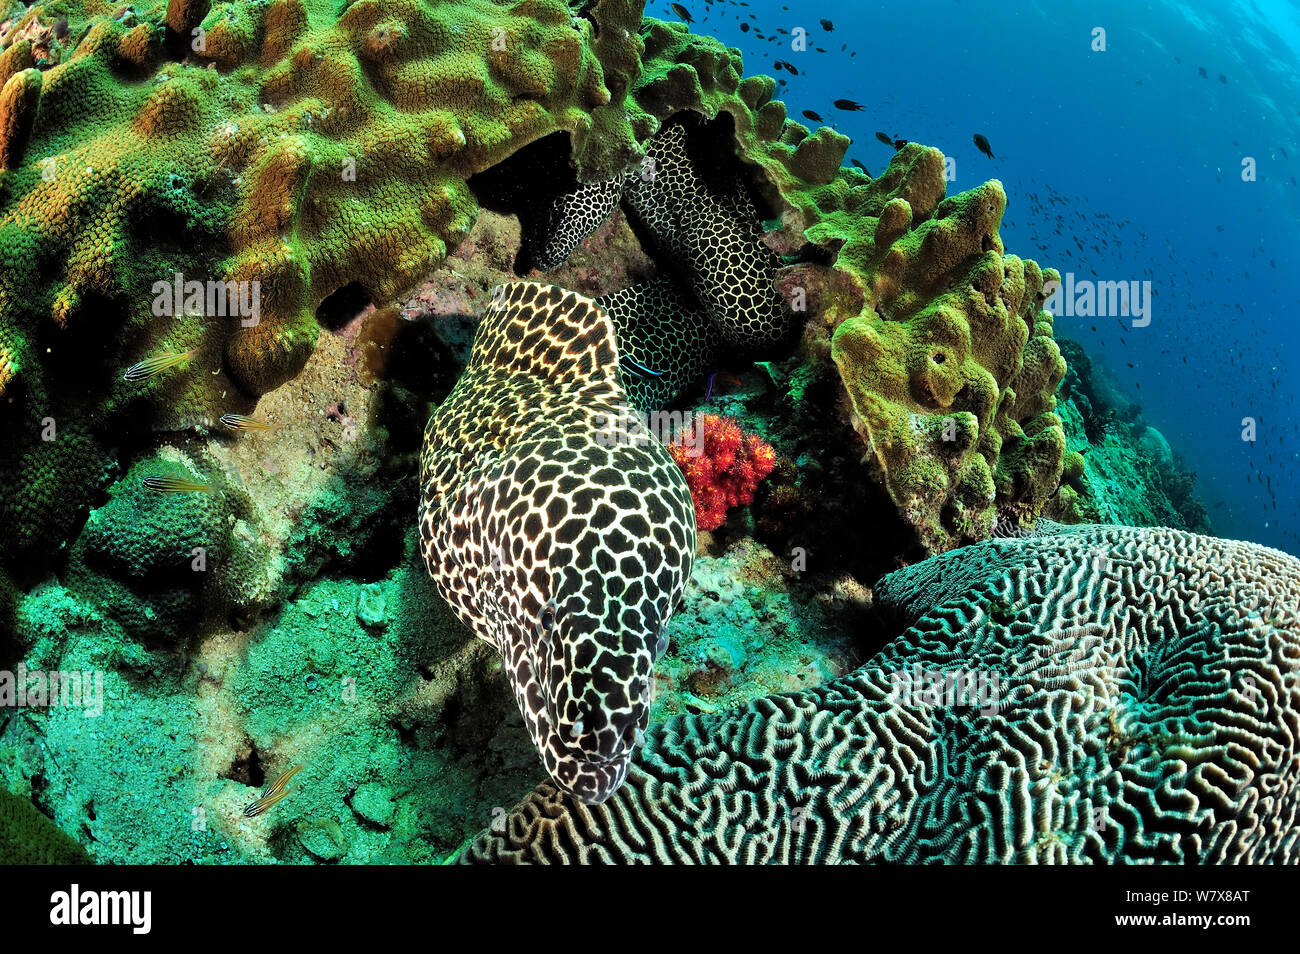 Honeycomb moray (Gymnothorax favagineus) out of its burrow / its hole close to a brain coral (Platygyra lamellina) with another one behind it, Daymaniyat islands, Oman. Gulf of Oman. Stock Photo